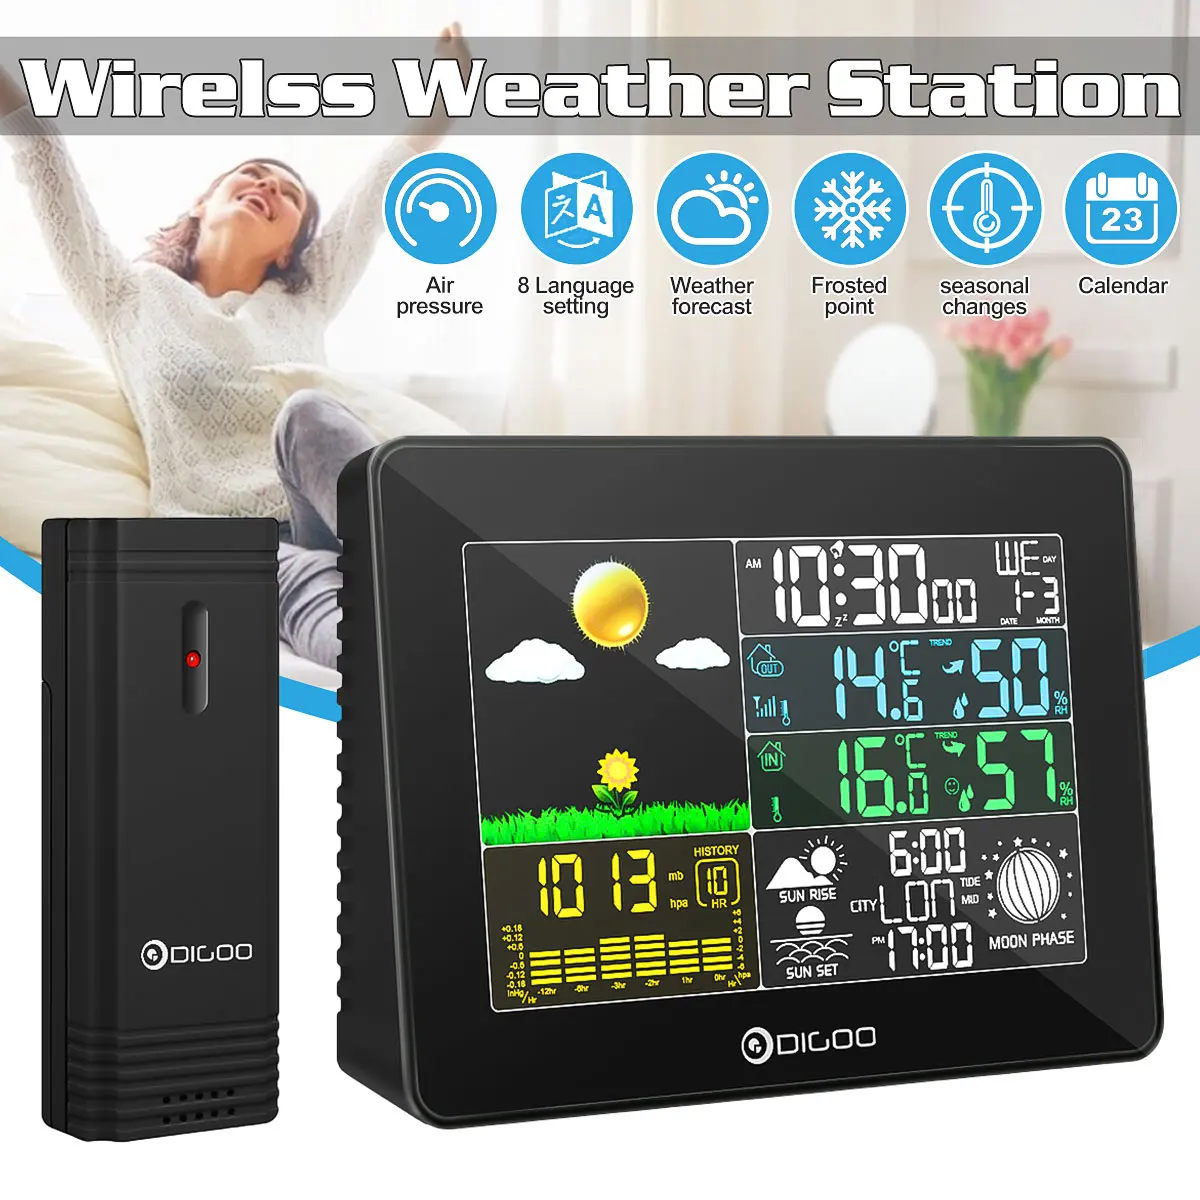 

DIGOO DG-TH8868 Indoor Outdoor LCD Weather Station Thermometer Humidity Snooze Alarm Clock Sunrise Sunset Calendar Forecast